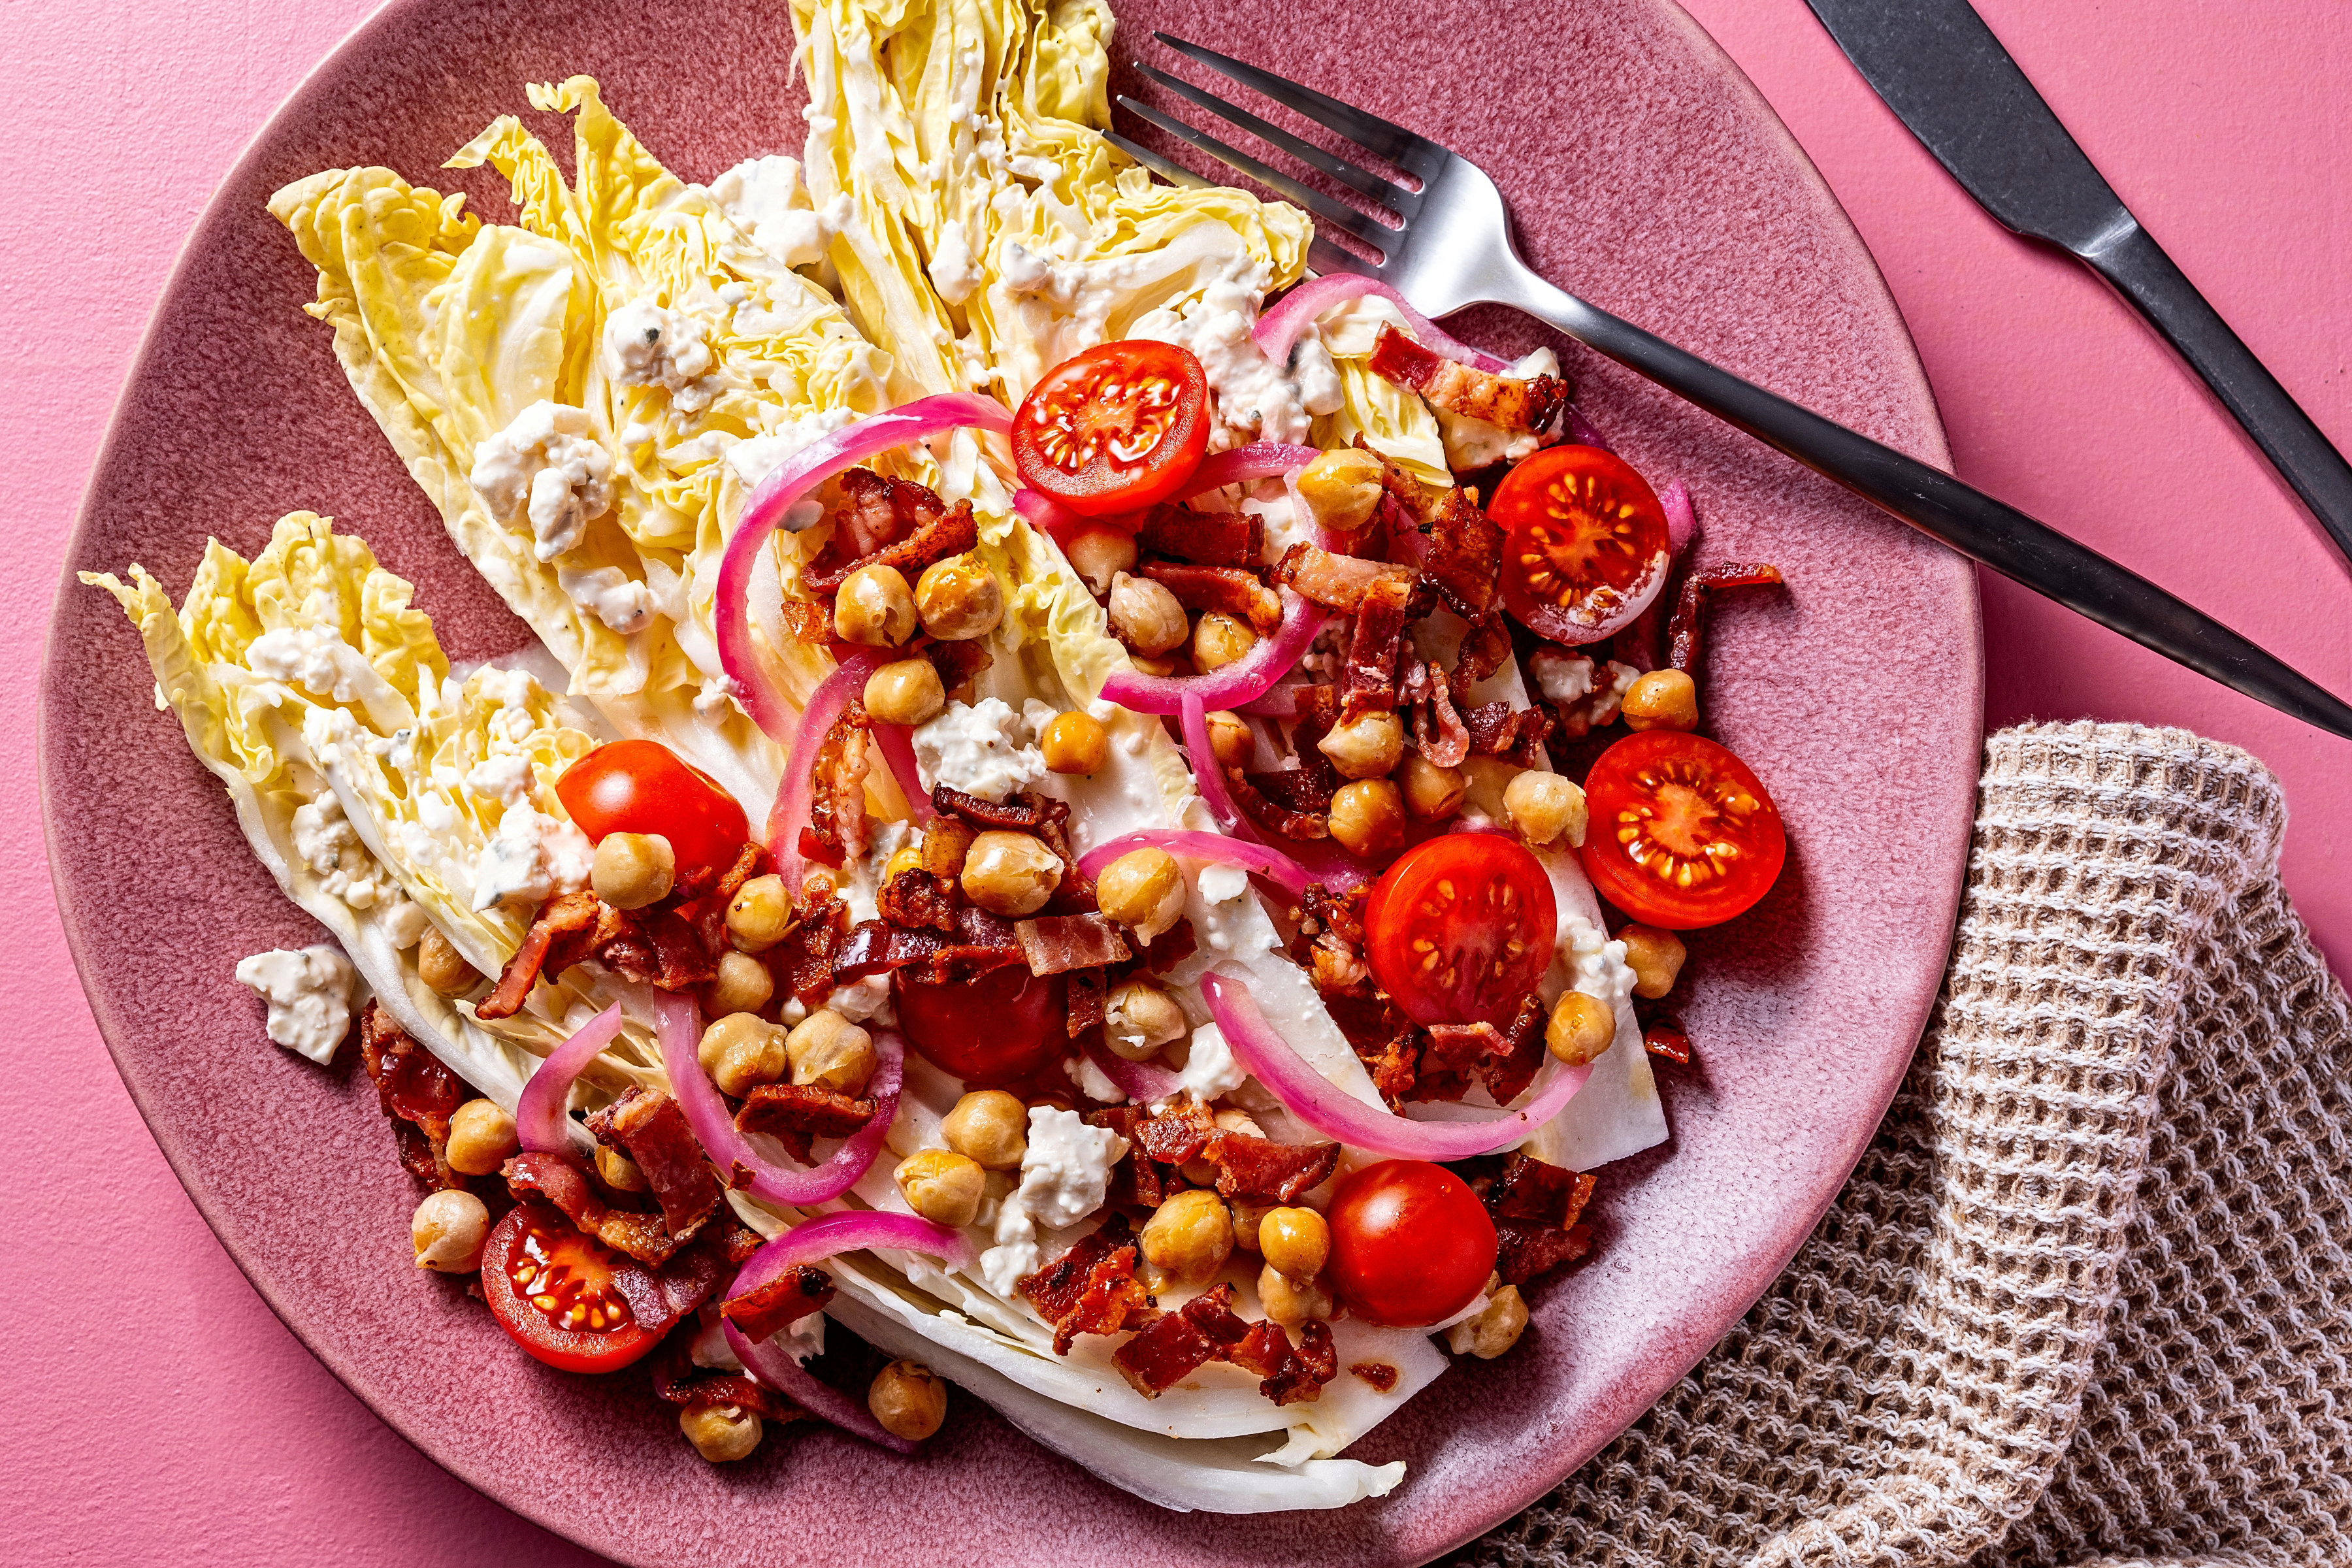 Napa cabbage gives this wedge salad extra crunch